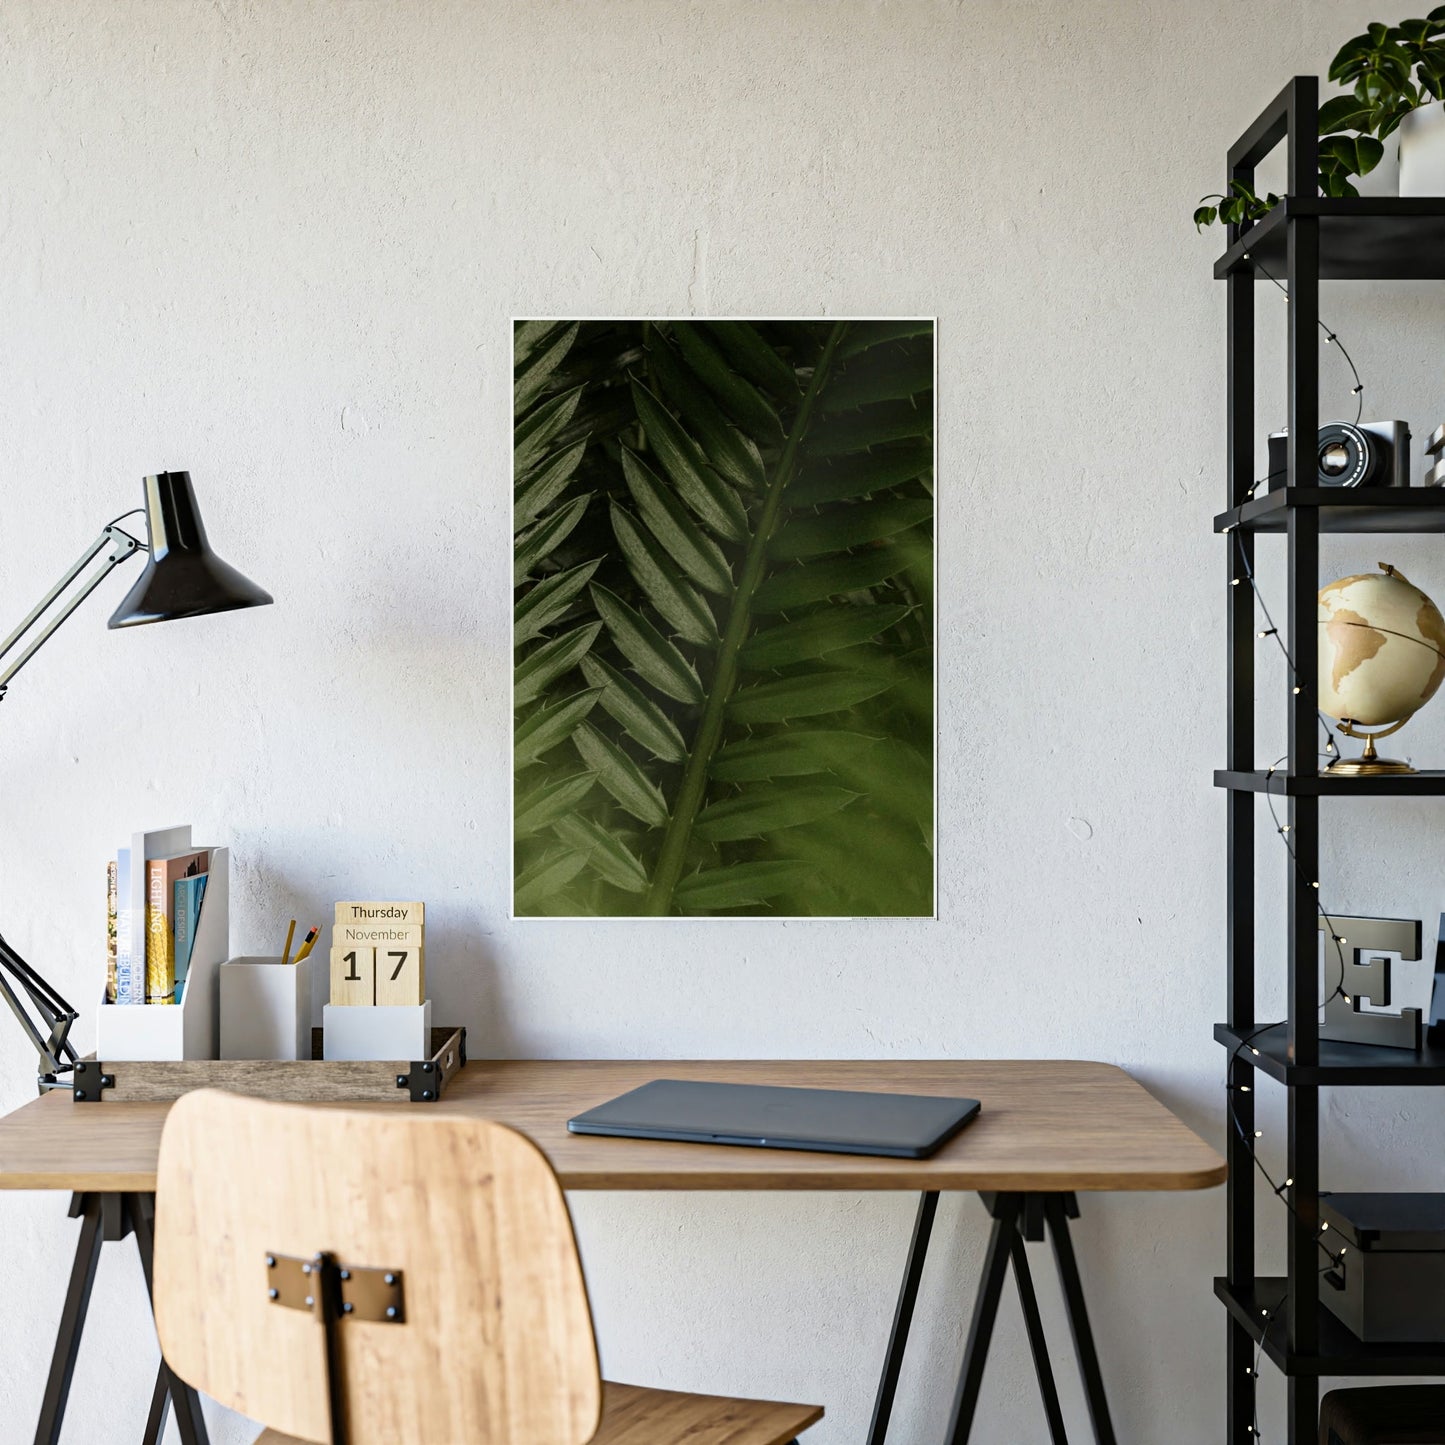 The Splendor of Ferns: A Beautiful Painting on Canvas